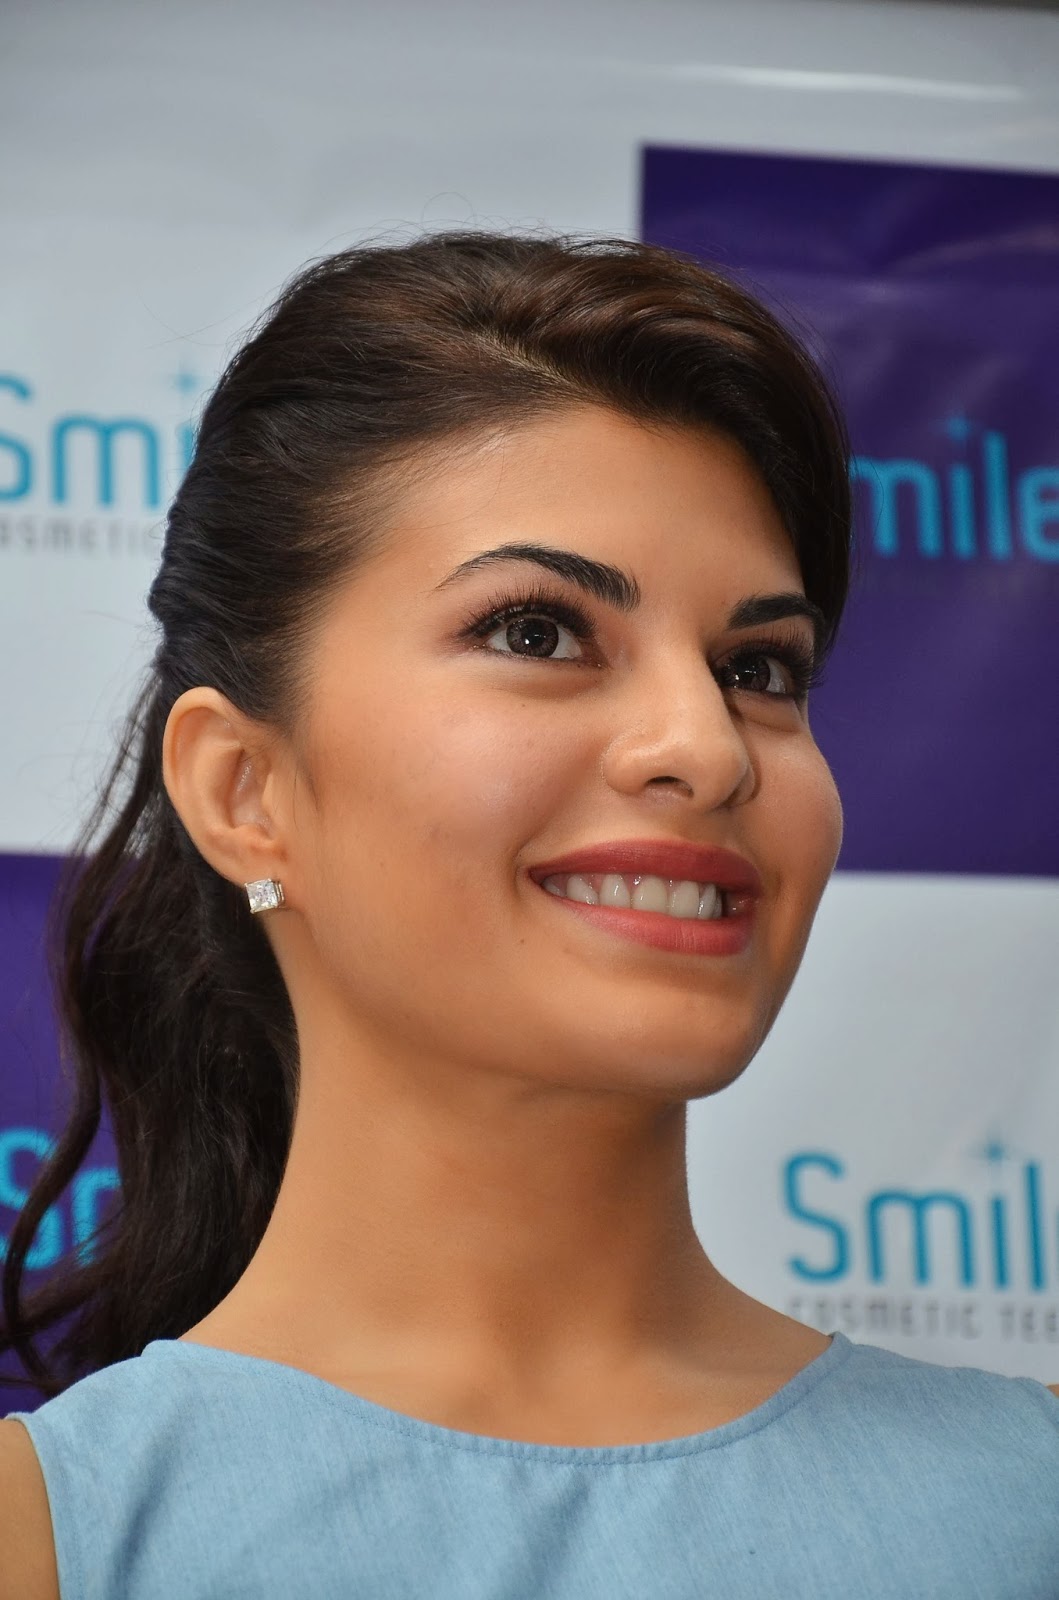 Real Salman Khan And Jacpueline Image Sex Sexy Xxx Hot Blue Video 2019 - High Quality Bollywood Celebrity Pictures: Jacqueline Fernandez Showcasing  Her Super Sexy Legs In Blue Dress At The Launch Of Smile Bar In Mumbai